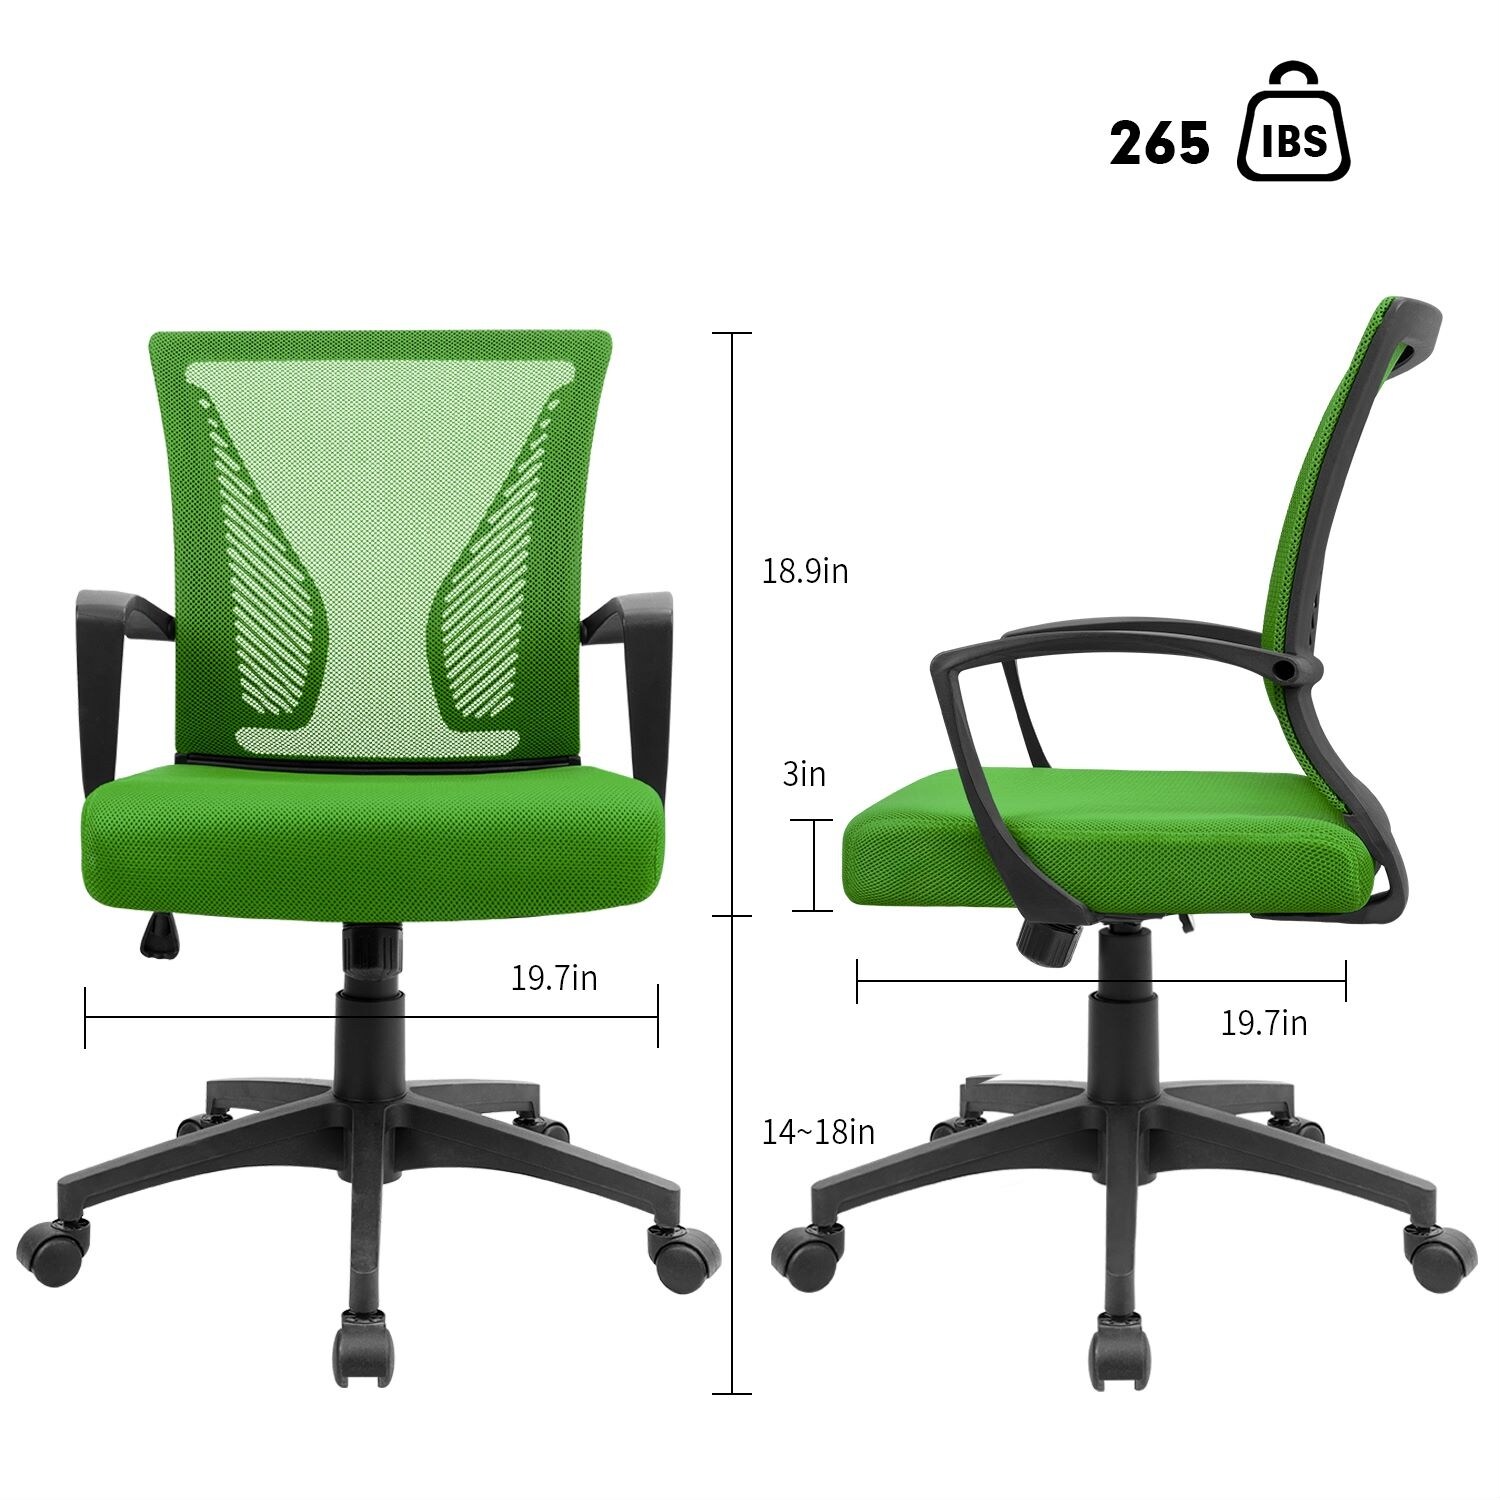 https://ak1.ostkcdn.com/images/products/is/images/direct/603bb98d18b75bd711168225d349b13dd8fdb1c8/Office-Chair-Mid-Back-Swivel-Lumbar-Support-Desk-Chair%2C-Computer-Ergonomic-Mesh-Chair-with-Armrest.jpg